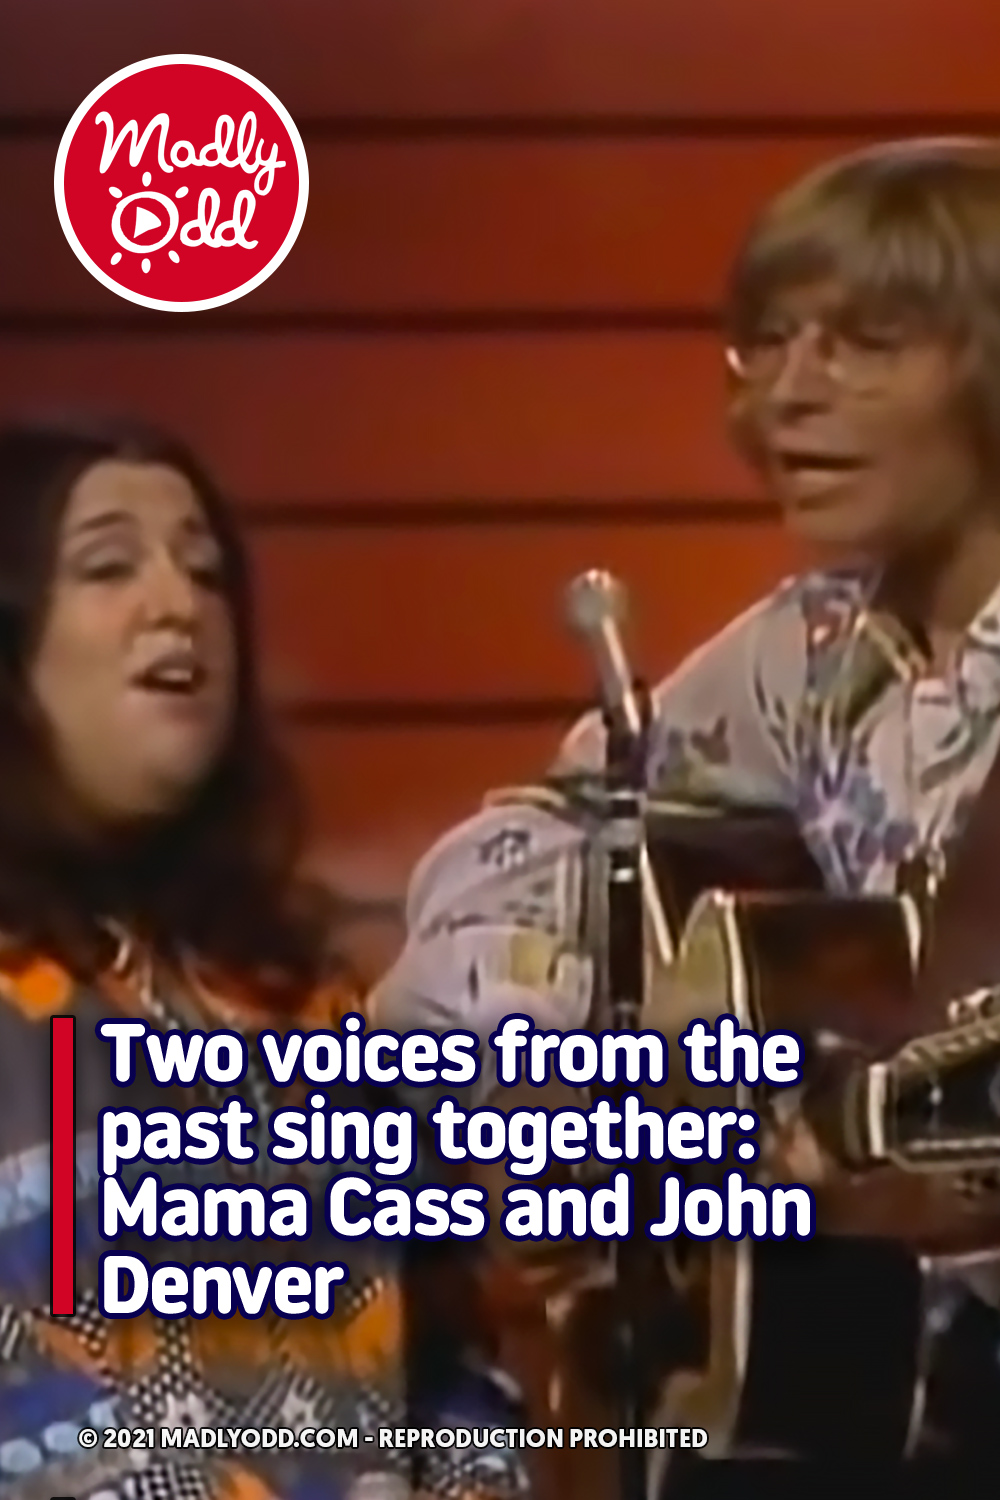 Two voices from the past sing together: Mama Cass and John Denver